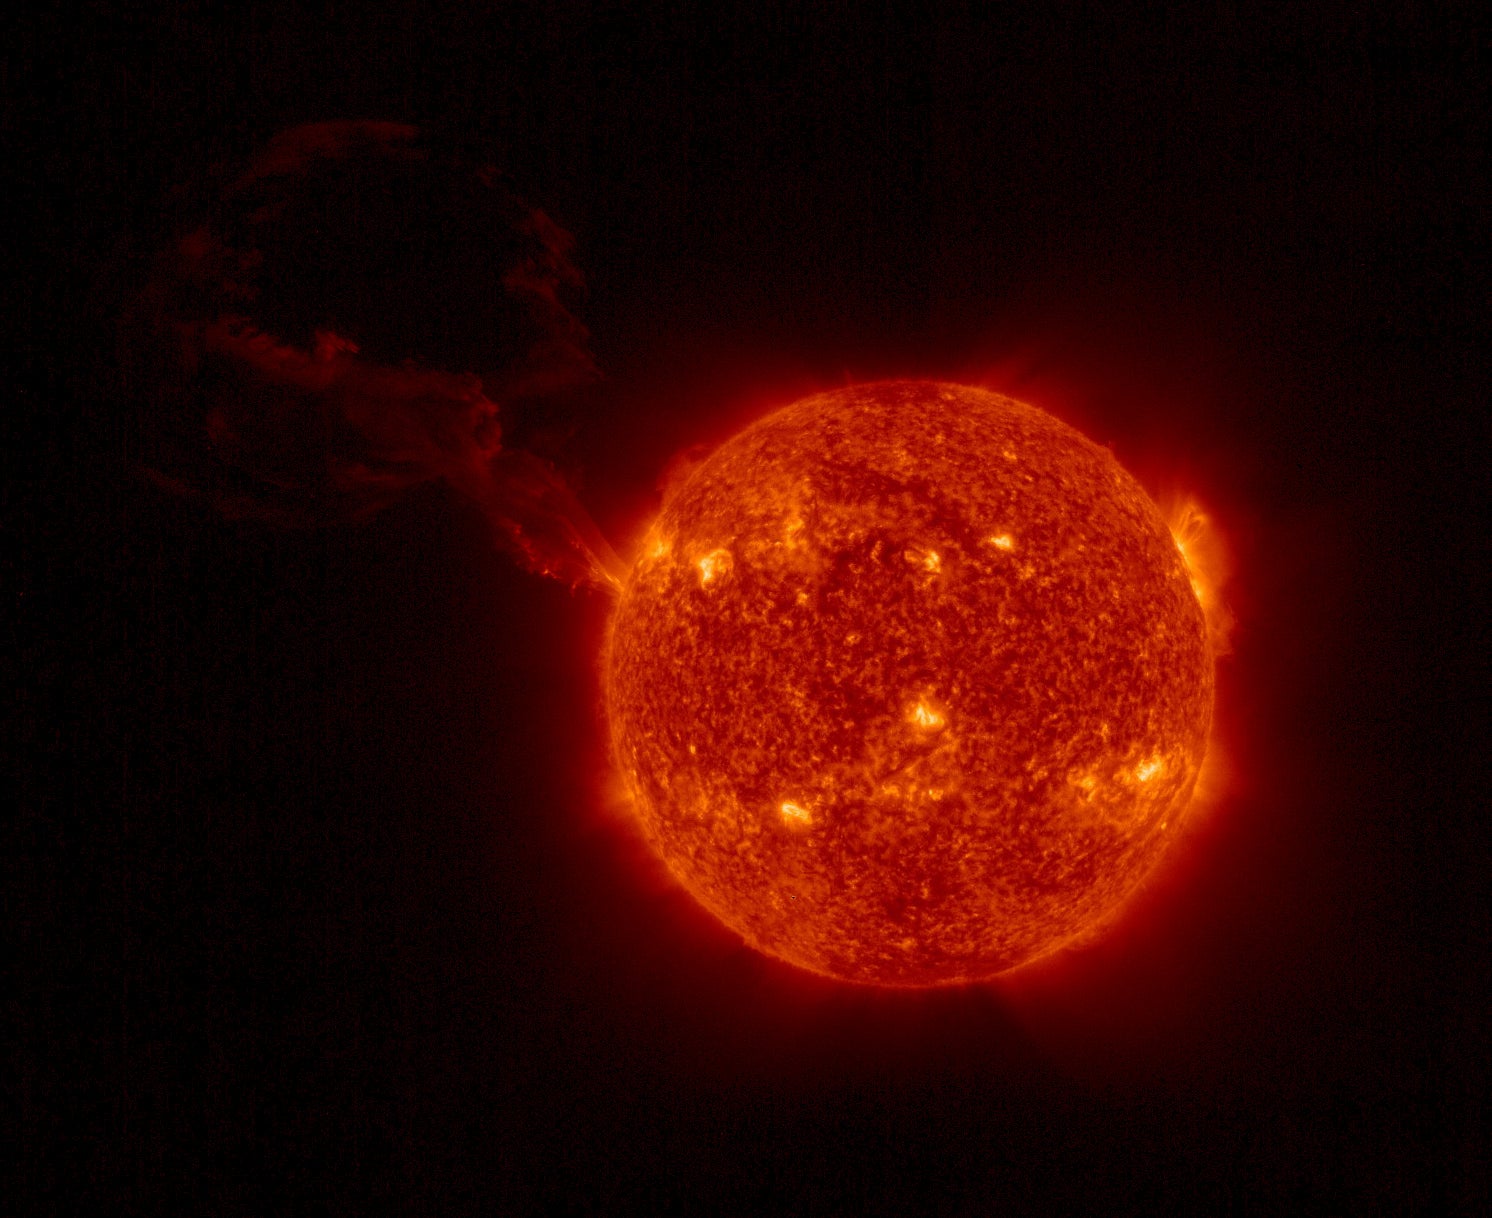 The Full Sun Imager of the Extreme Ultraviolet Imager on board the ESA/NASA Solar Orbiter spacecraft captured a giant solar eruption on 15 February 2022